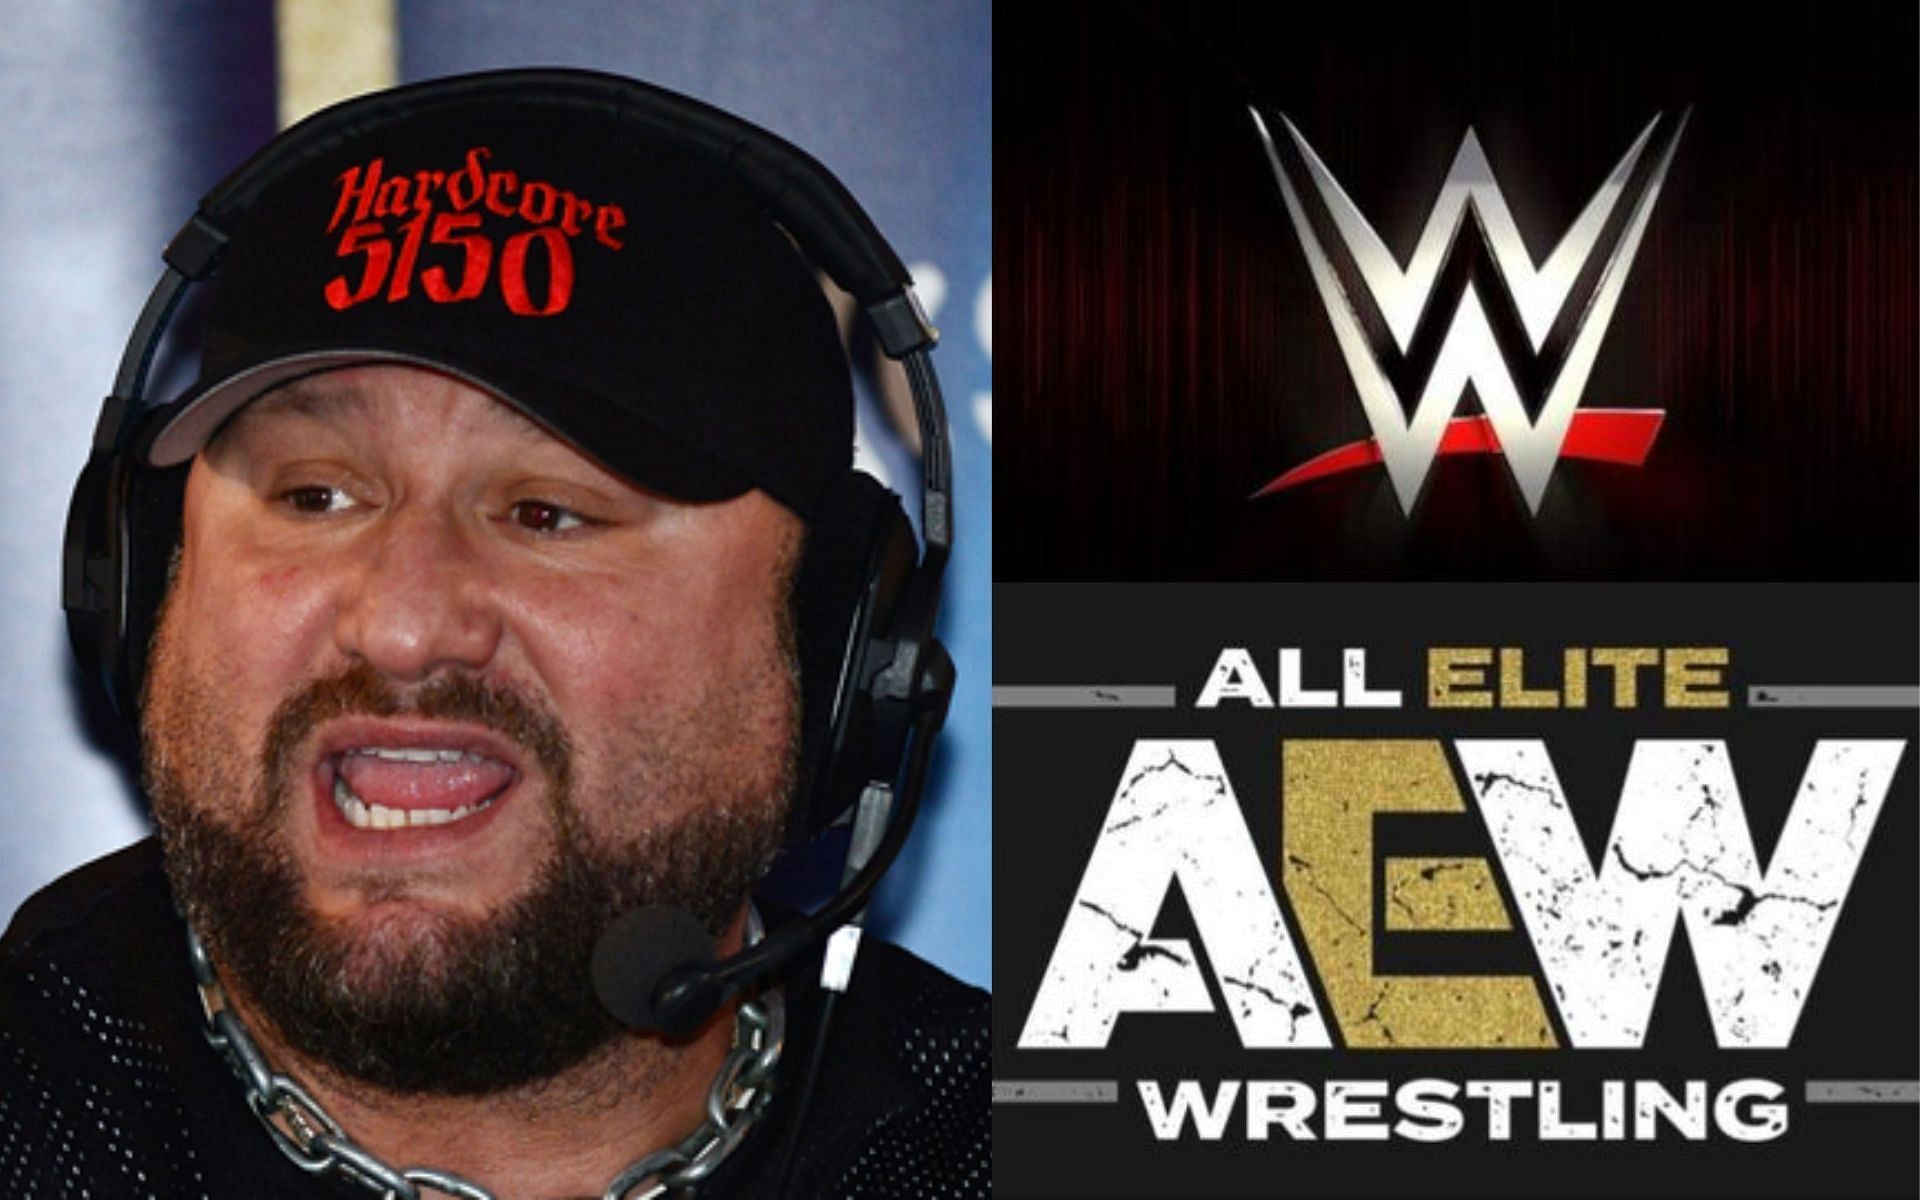 Bubba Ray (left) and AEW and WWE logos (right).